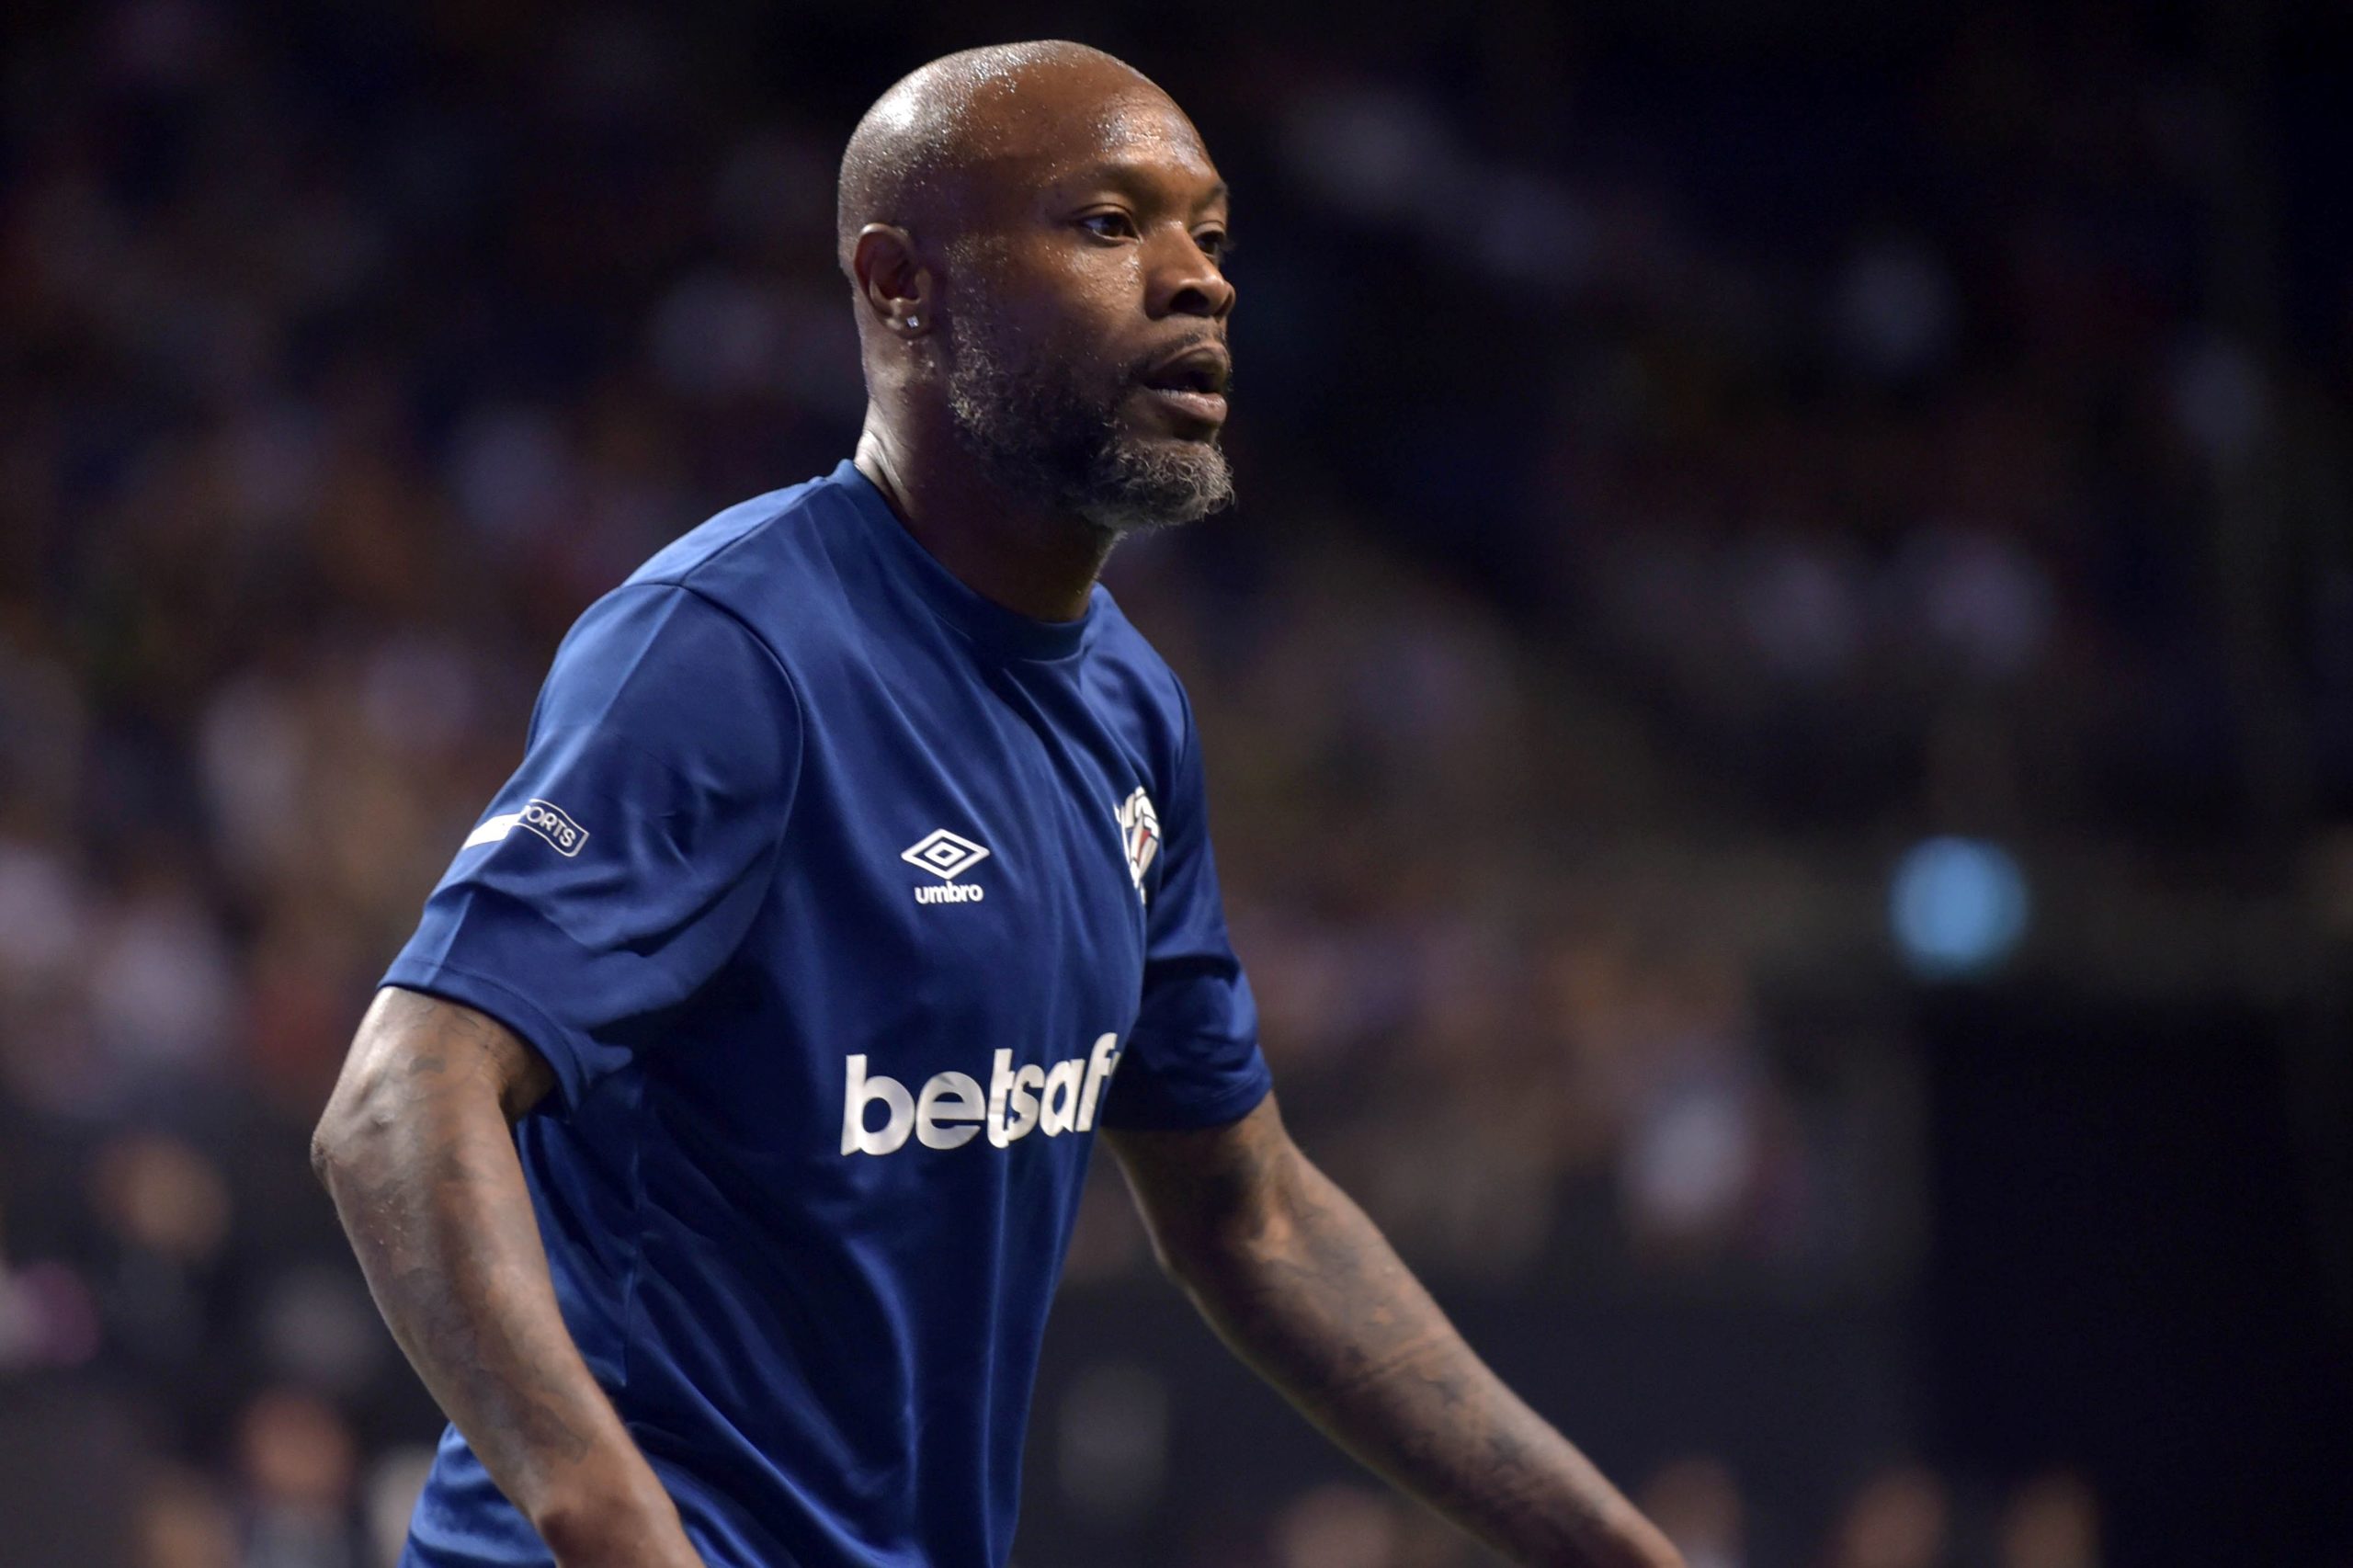 Williams Gallas says one Chelsea player is under 'big pressure' now and needs to learn from Frank Lampard